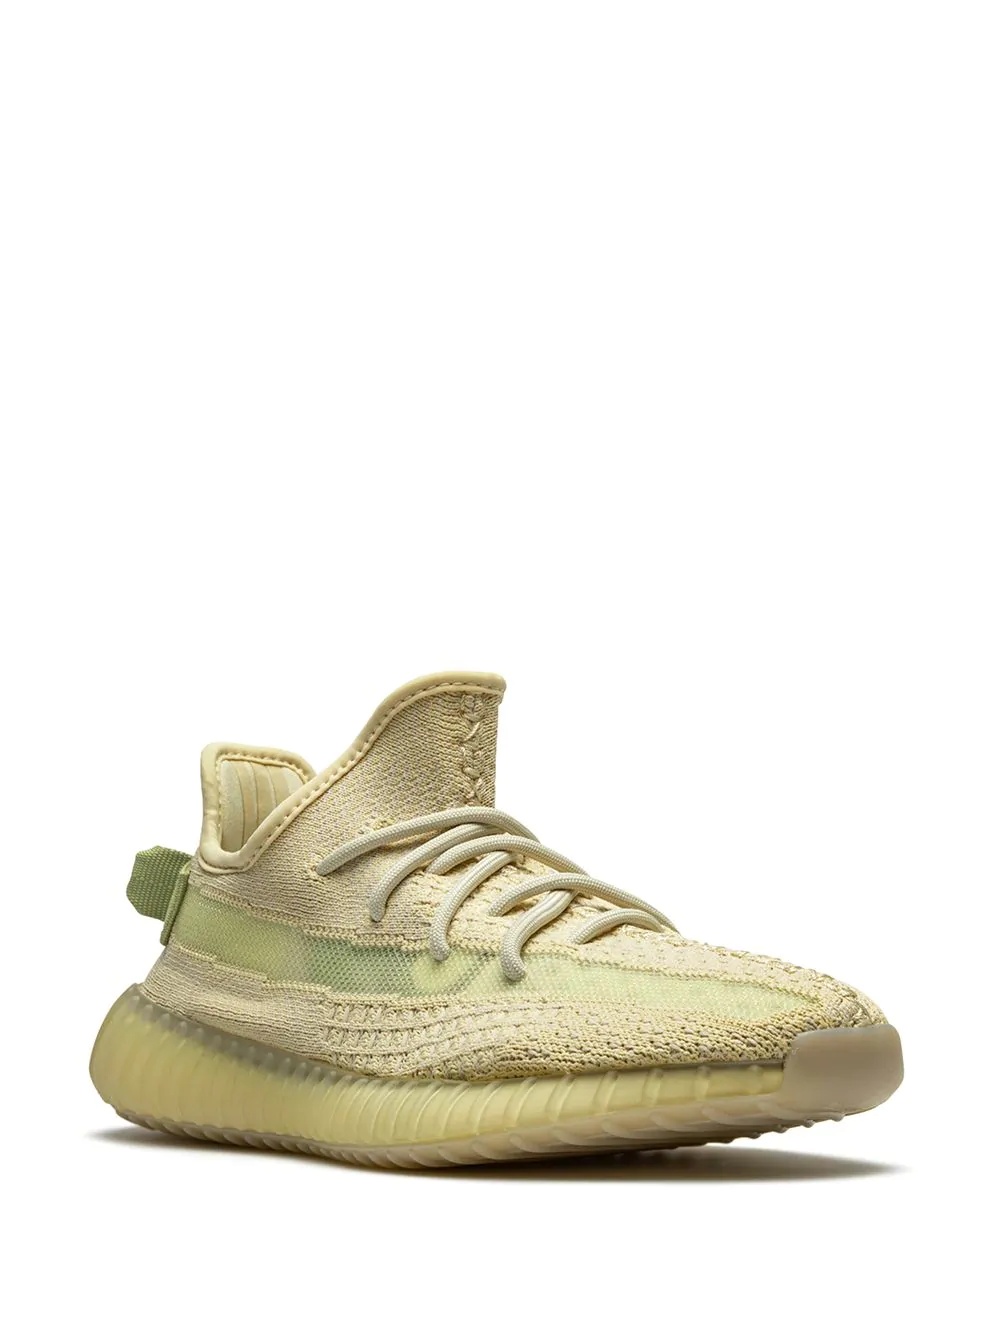 Yeezy Boost 350 V2 'Flax' sneakers - 2